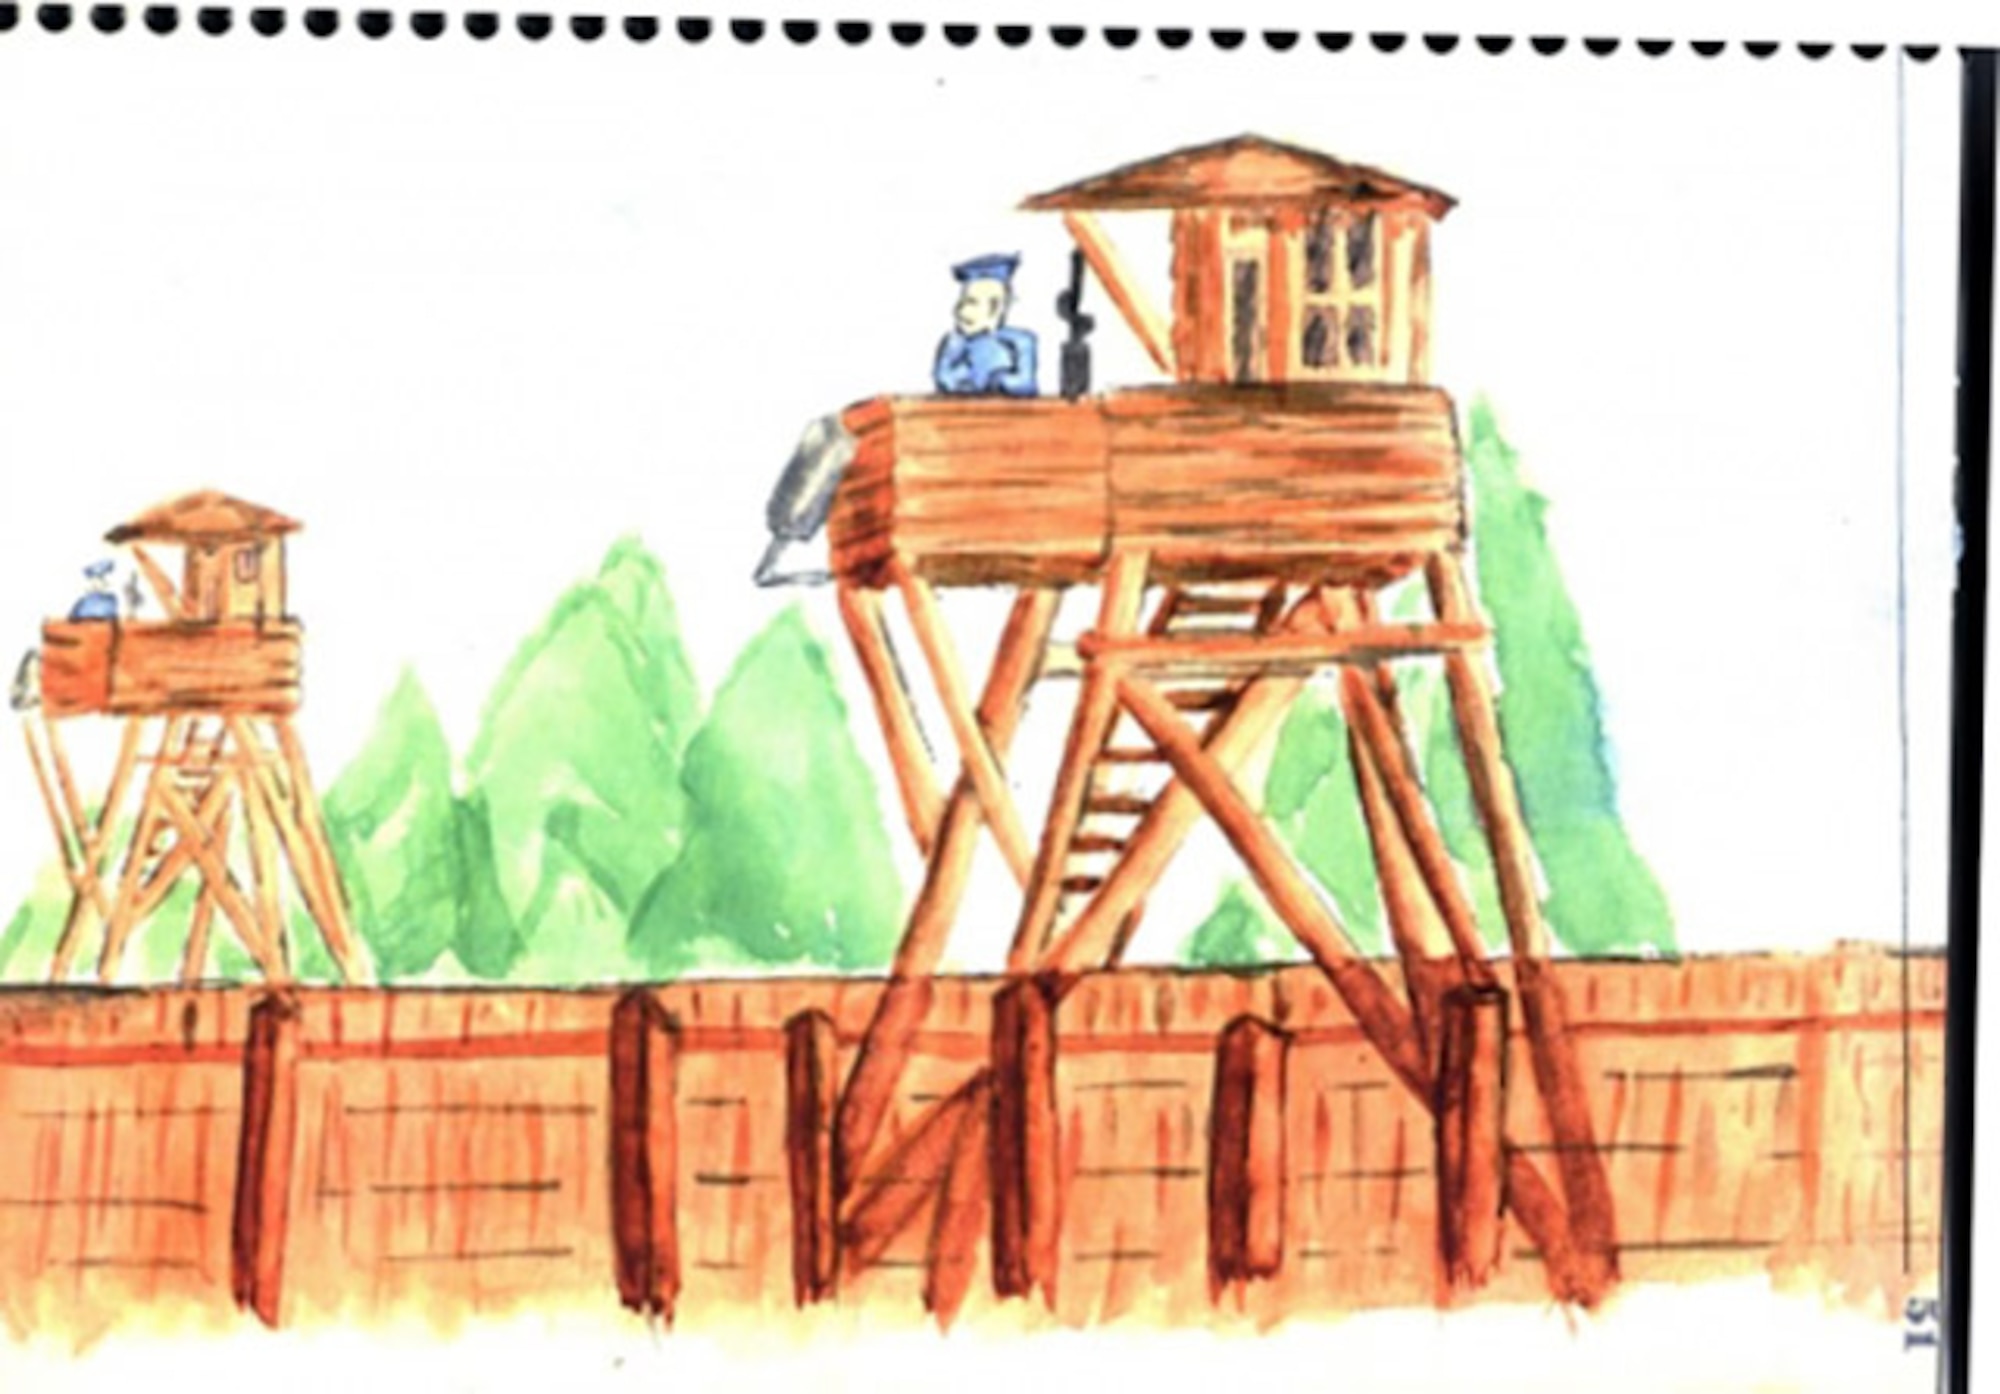 A sketch from 1st Lt Robert “Bob” Wolff, drawn during his time as a prisoner of war at Stalag Luft III during World War II, shows two of the guard towers situated on the perimeter of the camp in March 1944. Wolff was a B-17 Flying Fortress pilot with the 100th Bomb Group at Thorpe Abbotts, England.  During his time as a POW, the then-pilot drew many sketches recalling his time there, as he said, “there was nothing else to do!” A low wire was positioned about 10 to 12 feet from the double barbed wire fence around the camp, which was the beginning of a "no man’s land" which was "Verboten" (forbidden). According to Wolff, no POWs were allowed in that area – “or else …” (Photo/sketch courtesy of Bob Wolff and 100th Bomb Group Foundation website)